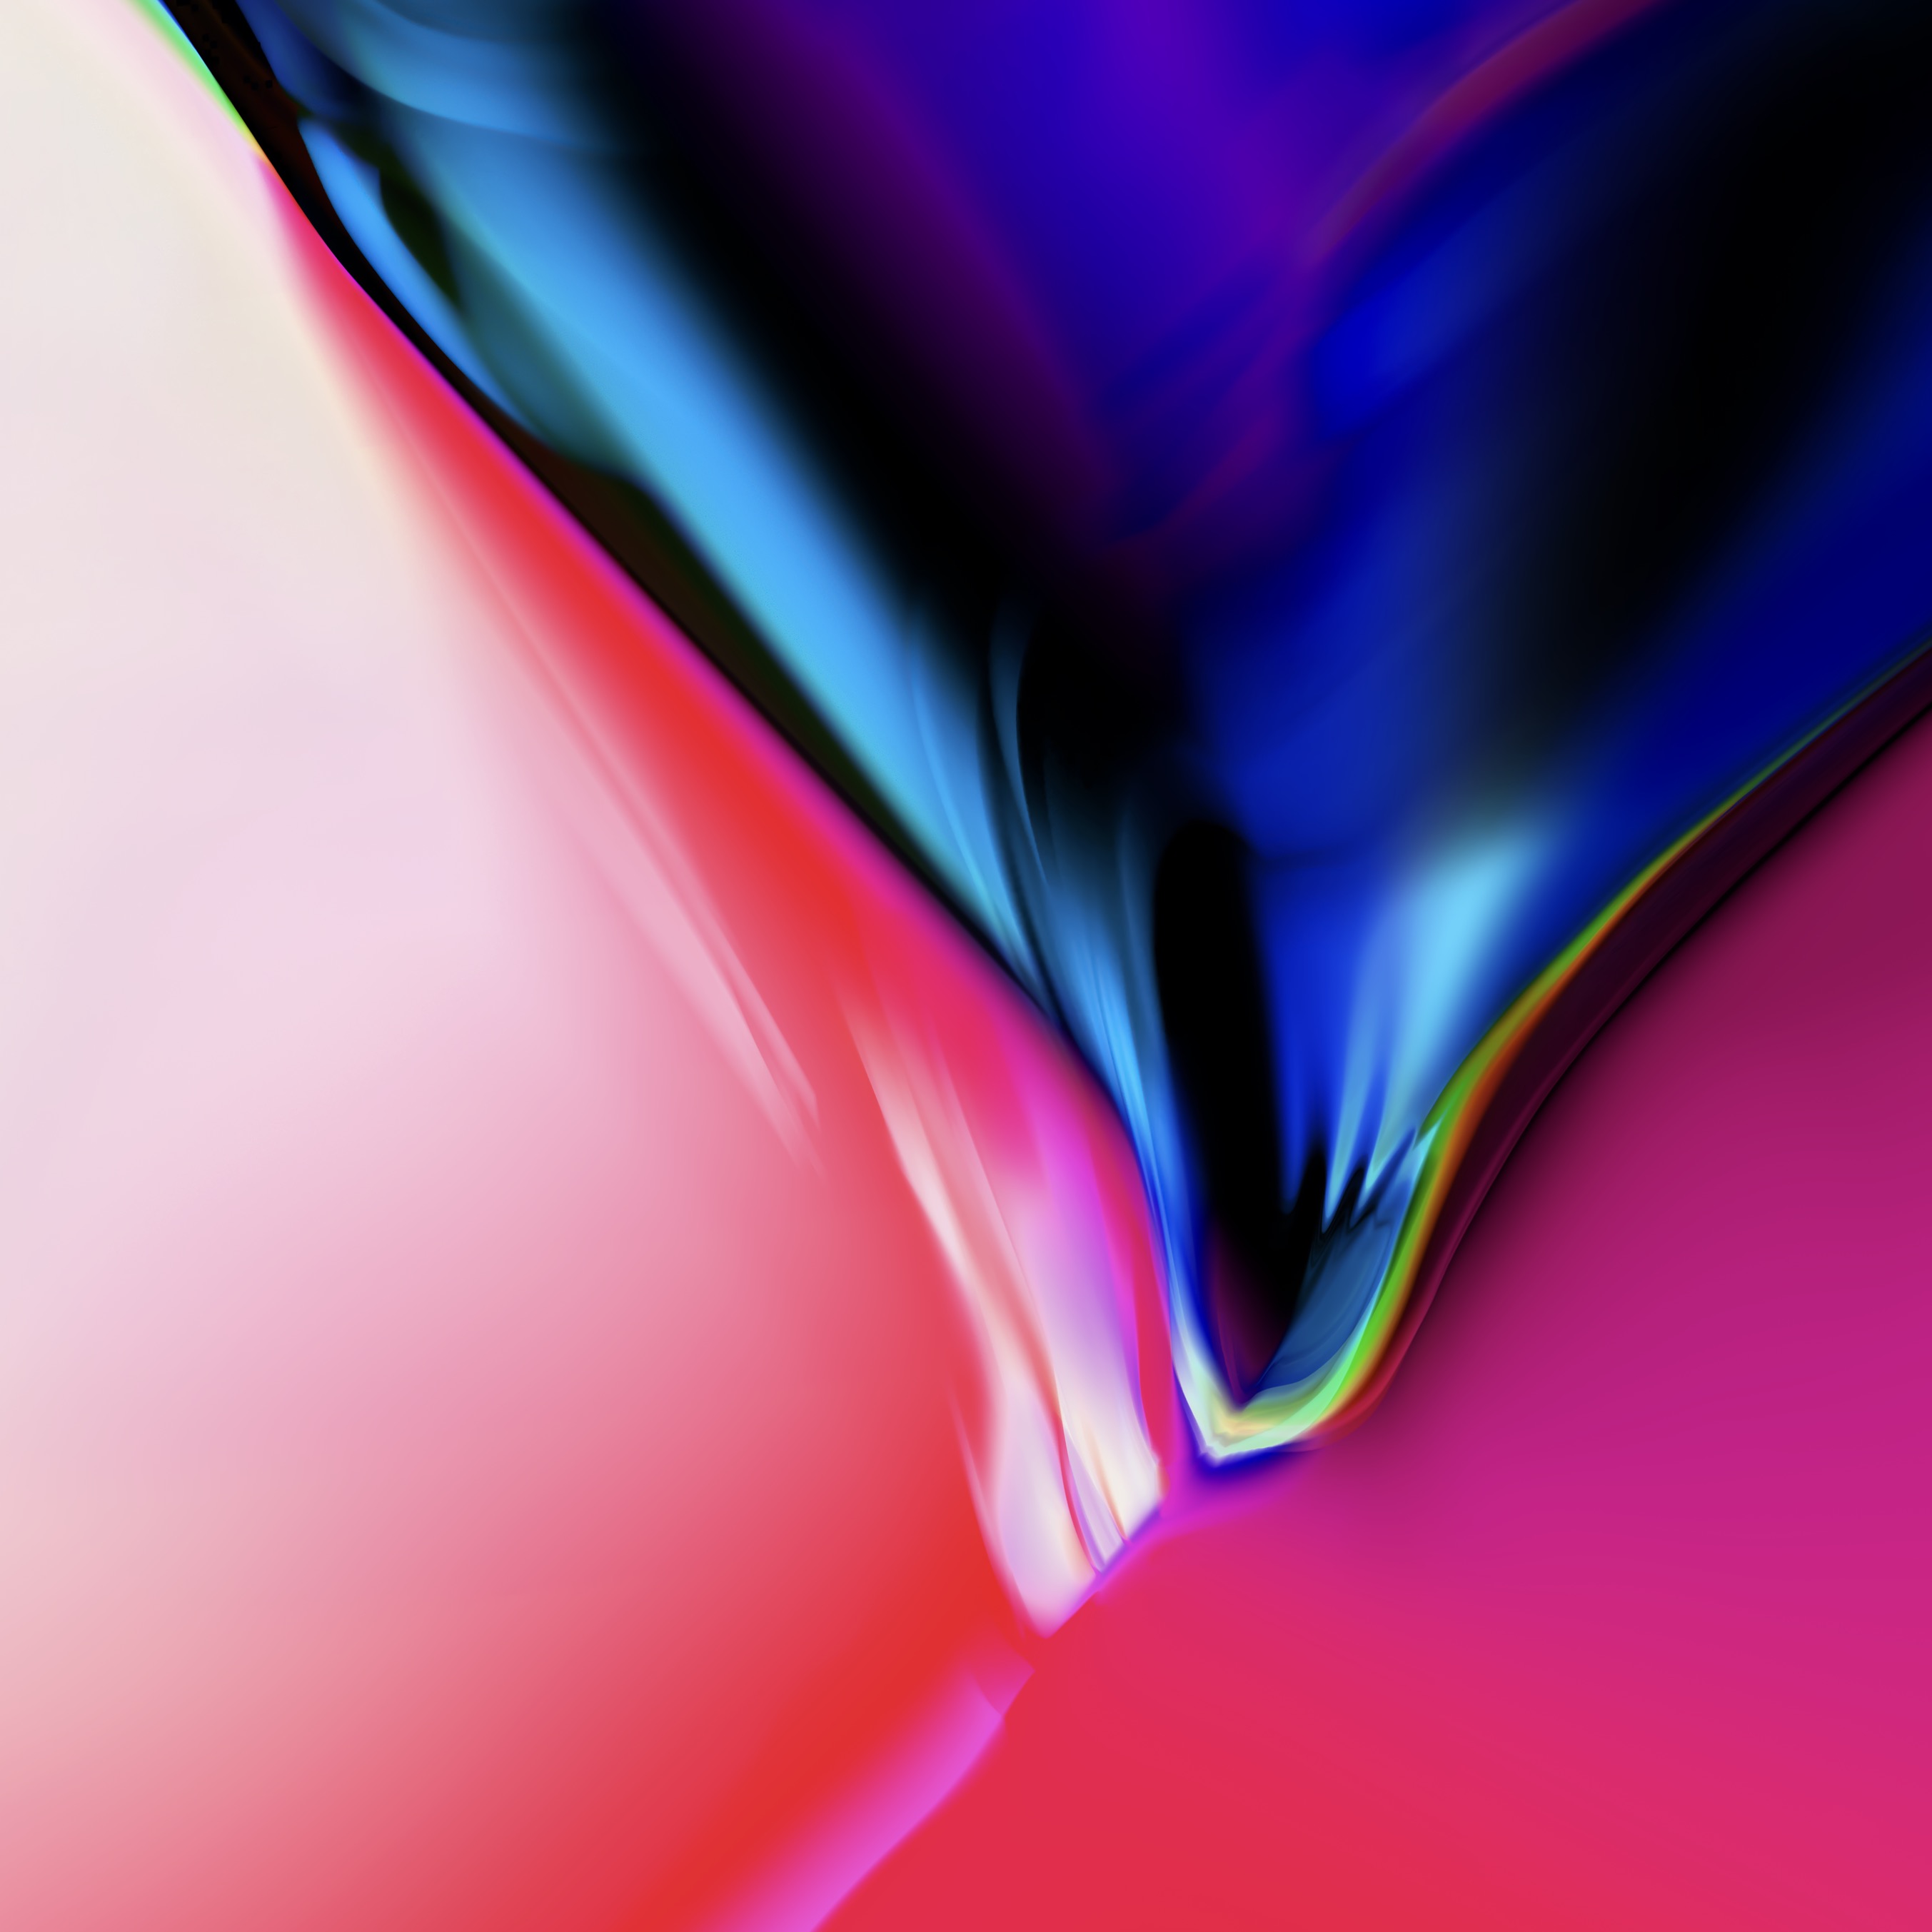 iPhone 8 Wallpapers Leaked 2706x2706